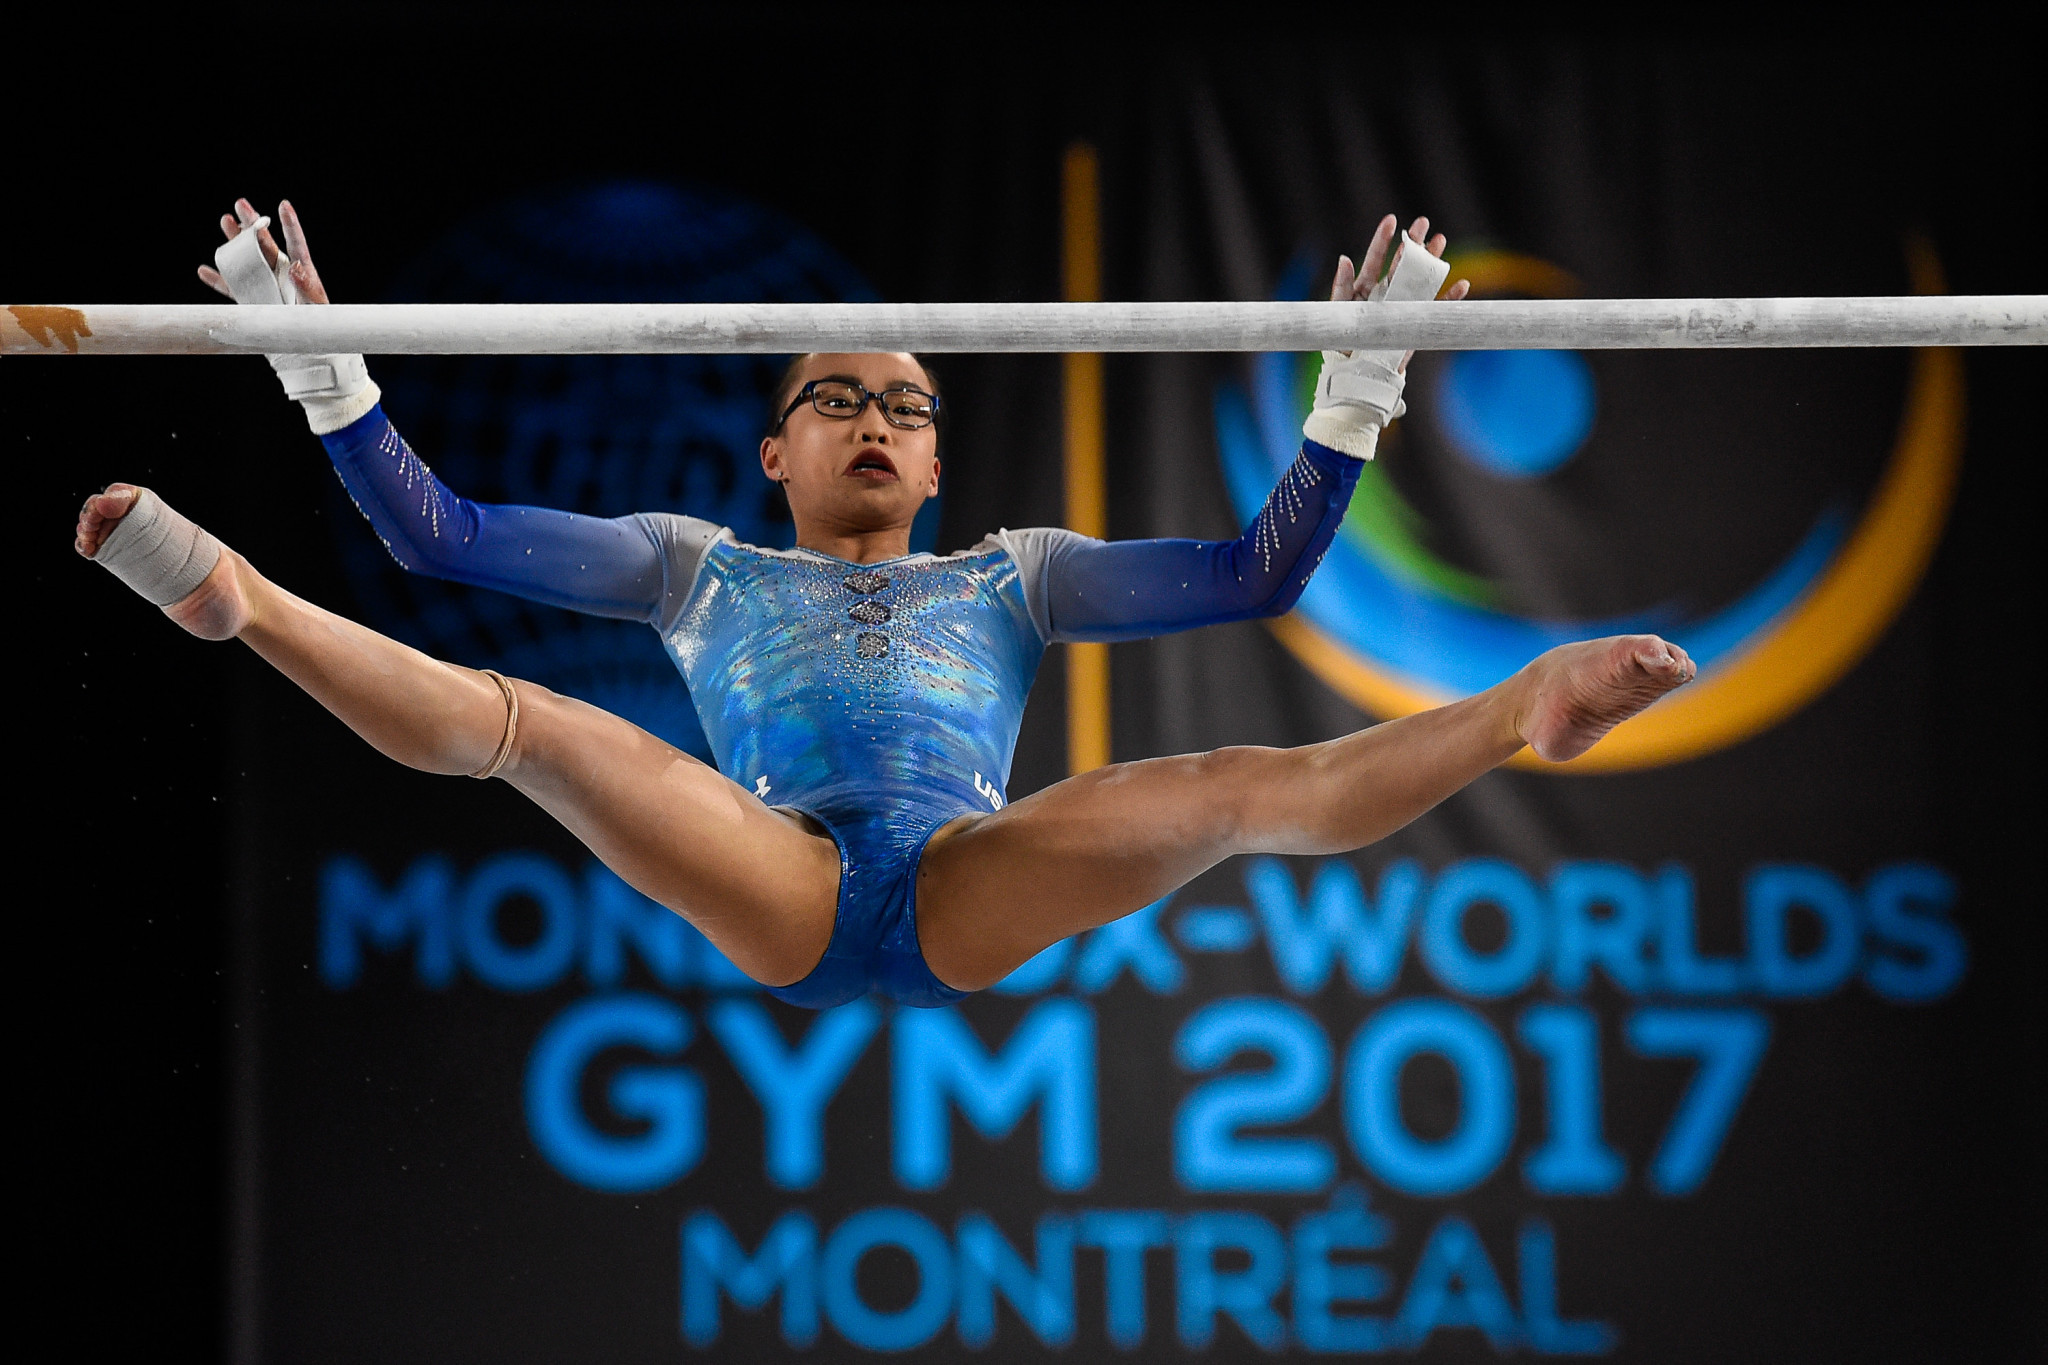 American Morgan Hurd secured her maiden Artistic Gymnastics World Championships gold medal ©Getty Images